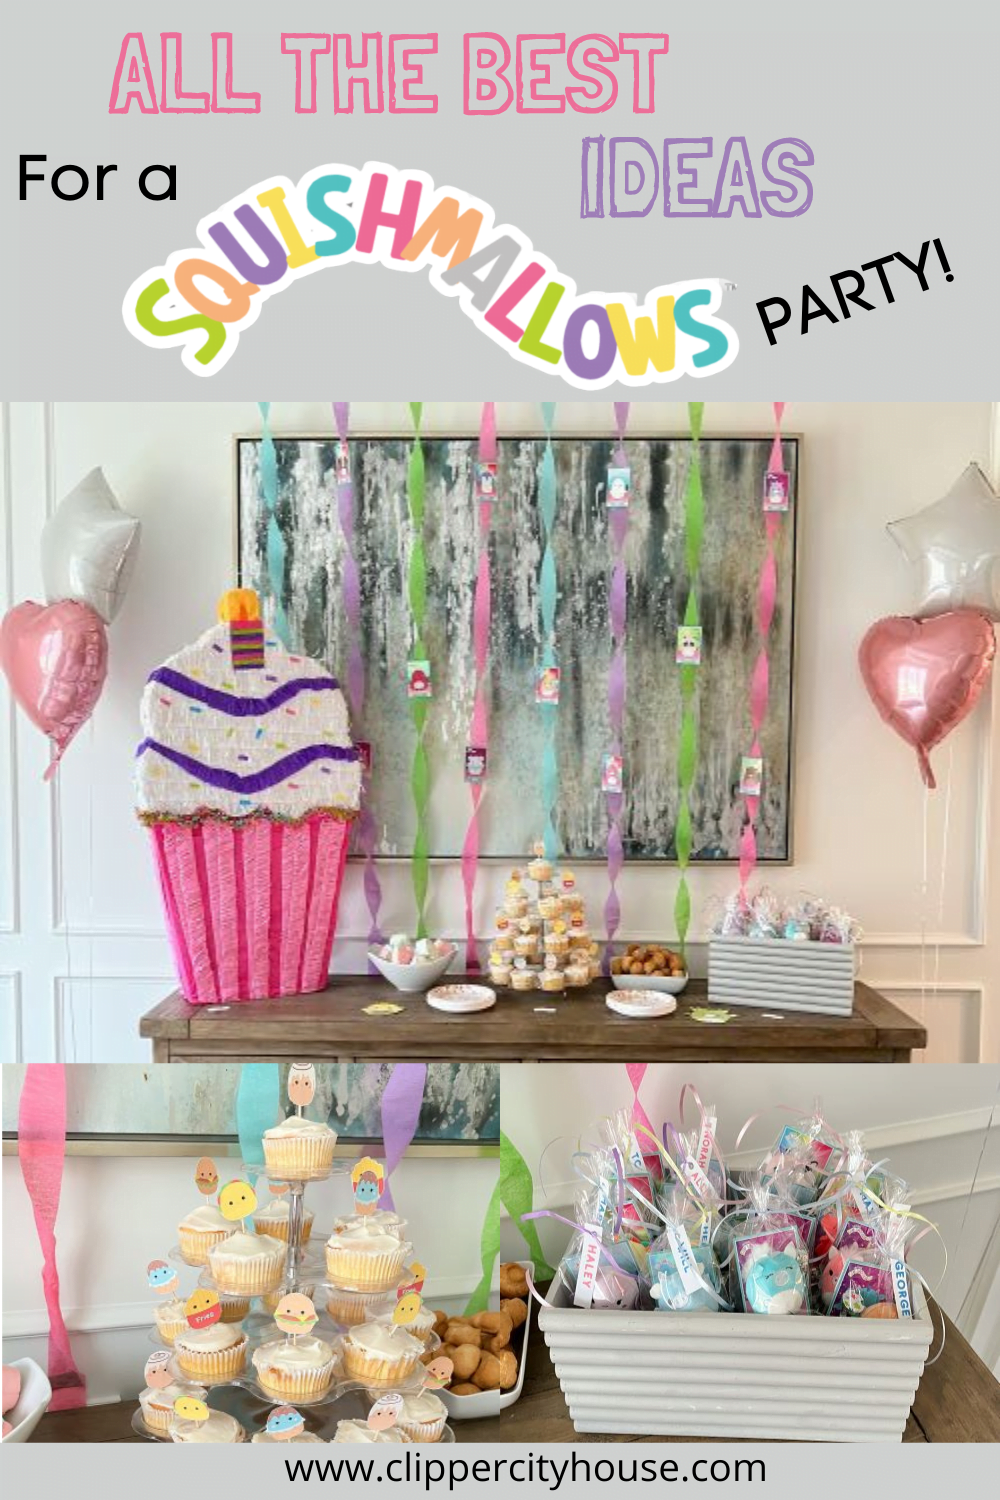 Party Decorations Party Supplies Party Favors Backdrop Cake Topper Cupcake  Toppers Balloons Table Cloth Paper Plates